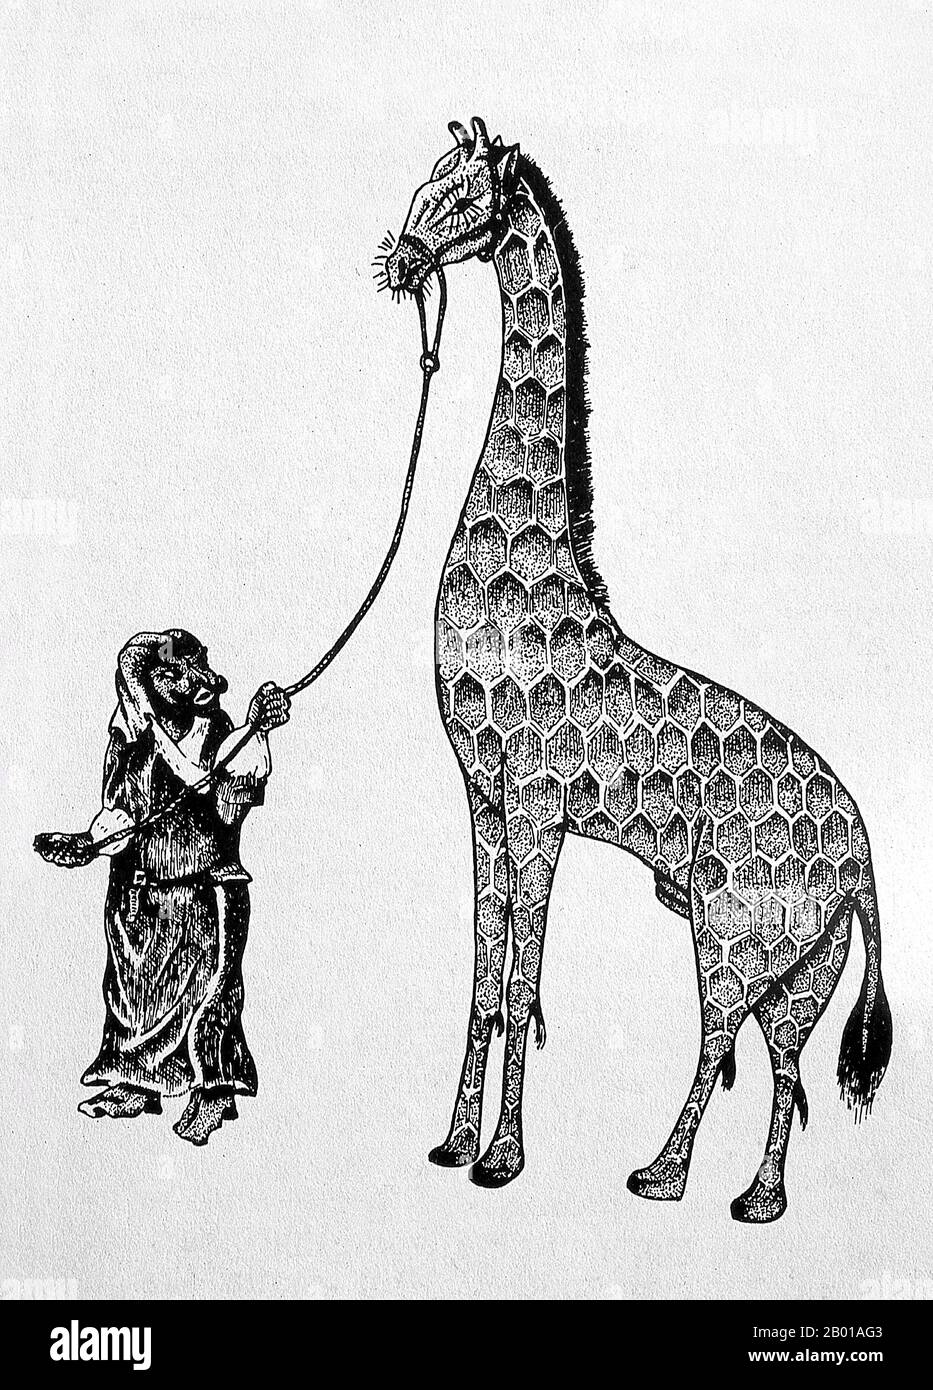 China: A giraffe brought to the court of the Ming Dynasty Yongle Emperor (2 May 1360 - 12 August 1424) from East Africa by the fleet of Admiral Zheng He (1371–1435), c. 15th century.  Between 1405 and 1433, the Ming government sponsored a series of seven naval expeditions. The Yongle emperor designed them to establish a Chinese presence, impose imperial control over trade, impress foreign peoples in the Indian Ocean basin and extend the empire's tributary system. Zheng He was placed as the admiral in control of the huge fleet and armed forces that undertook these expeditions. Stock Photo